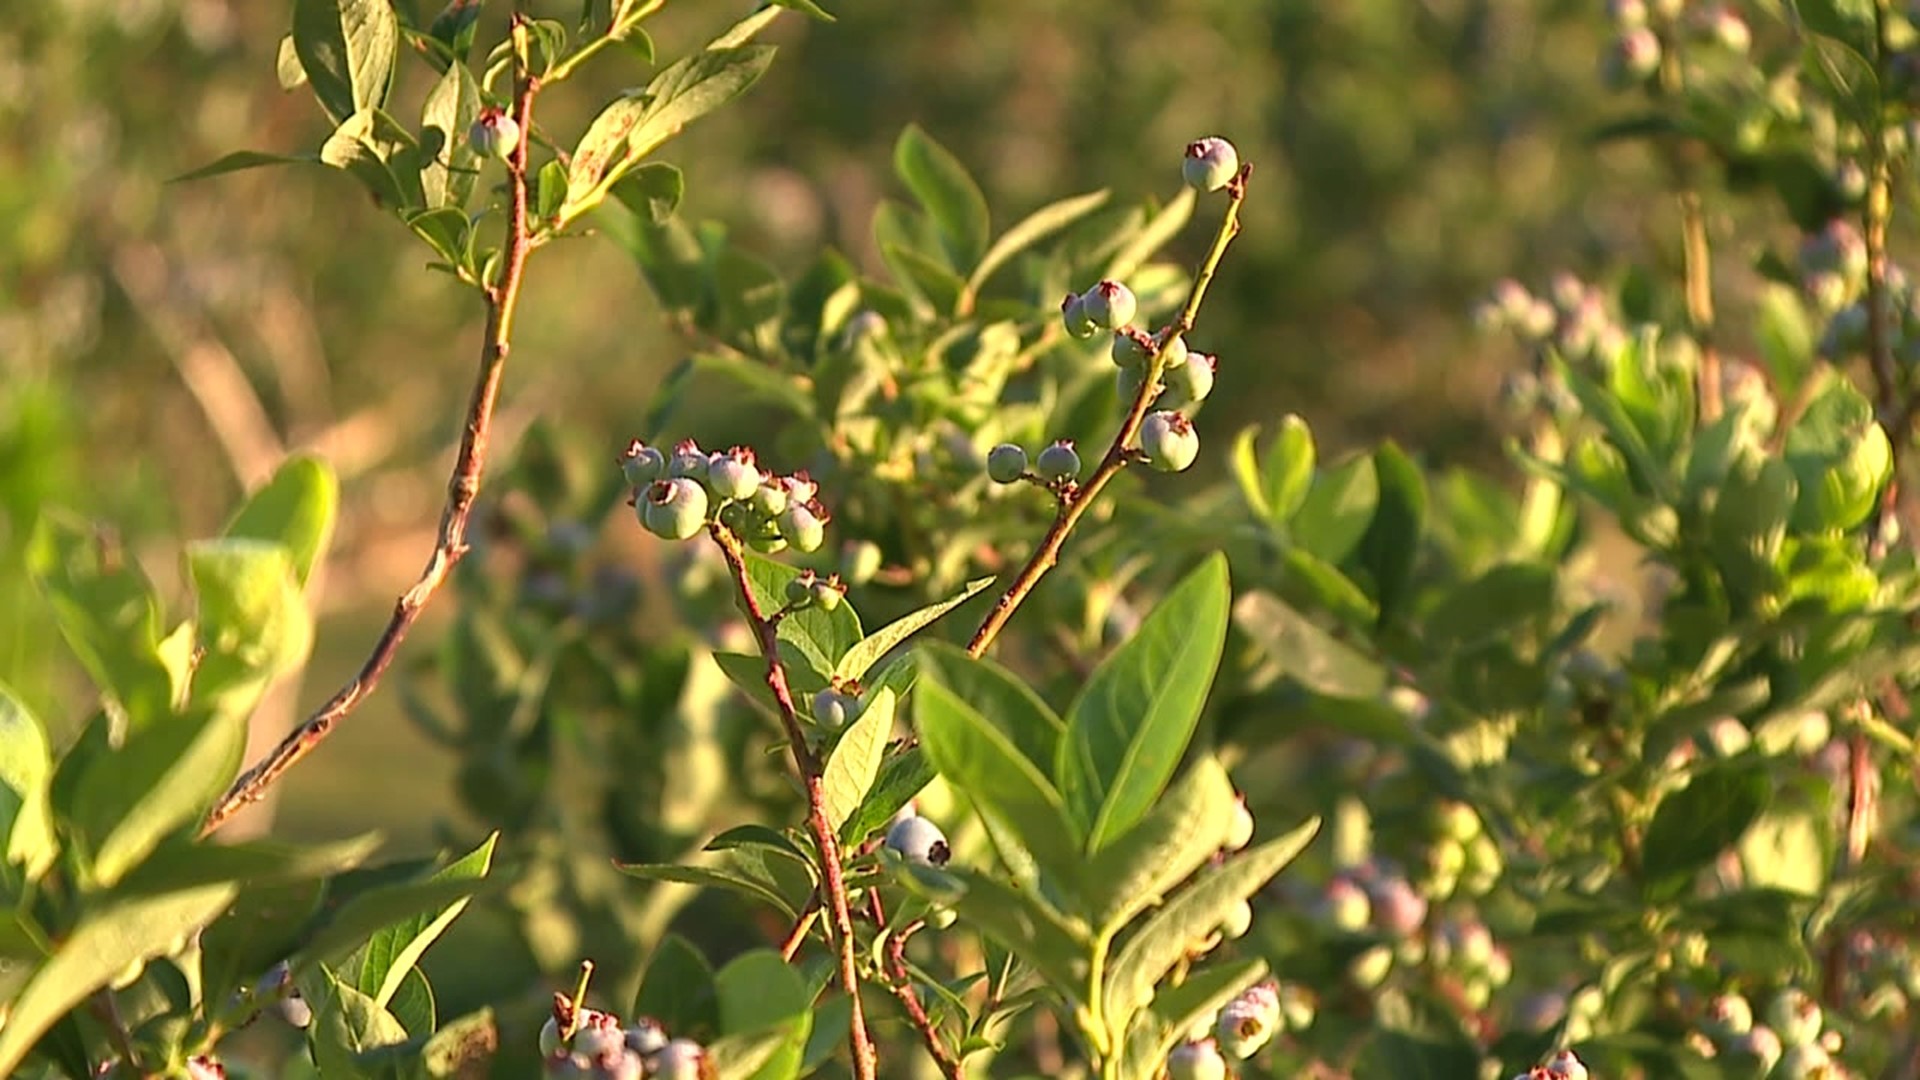 He was 89 years old when he decided to change things up on his family farm. The Wyoming County man now helps run Berries & Blooms at High Horizons Farm.